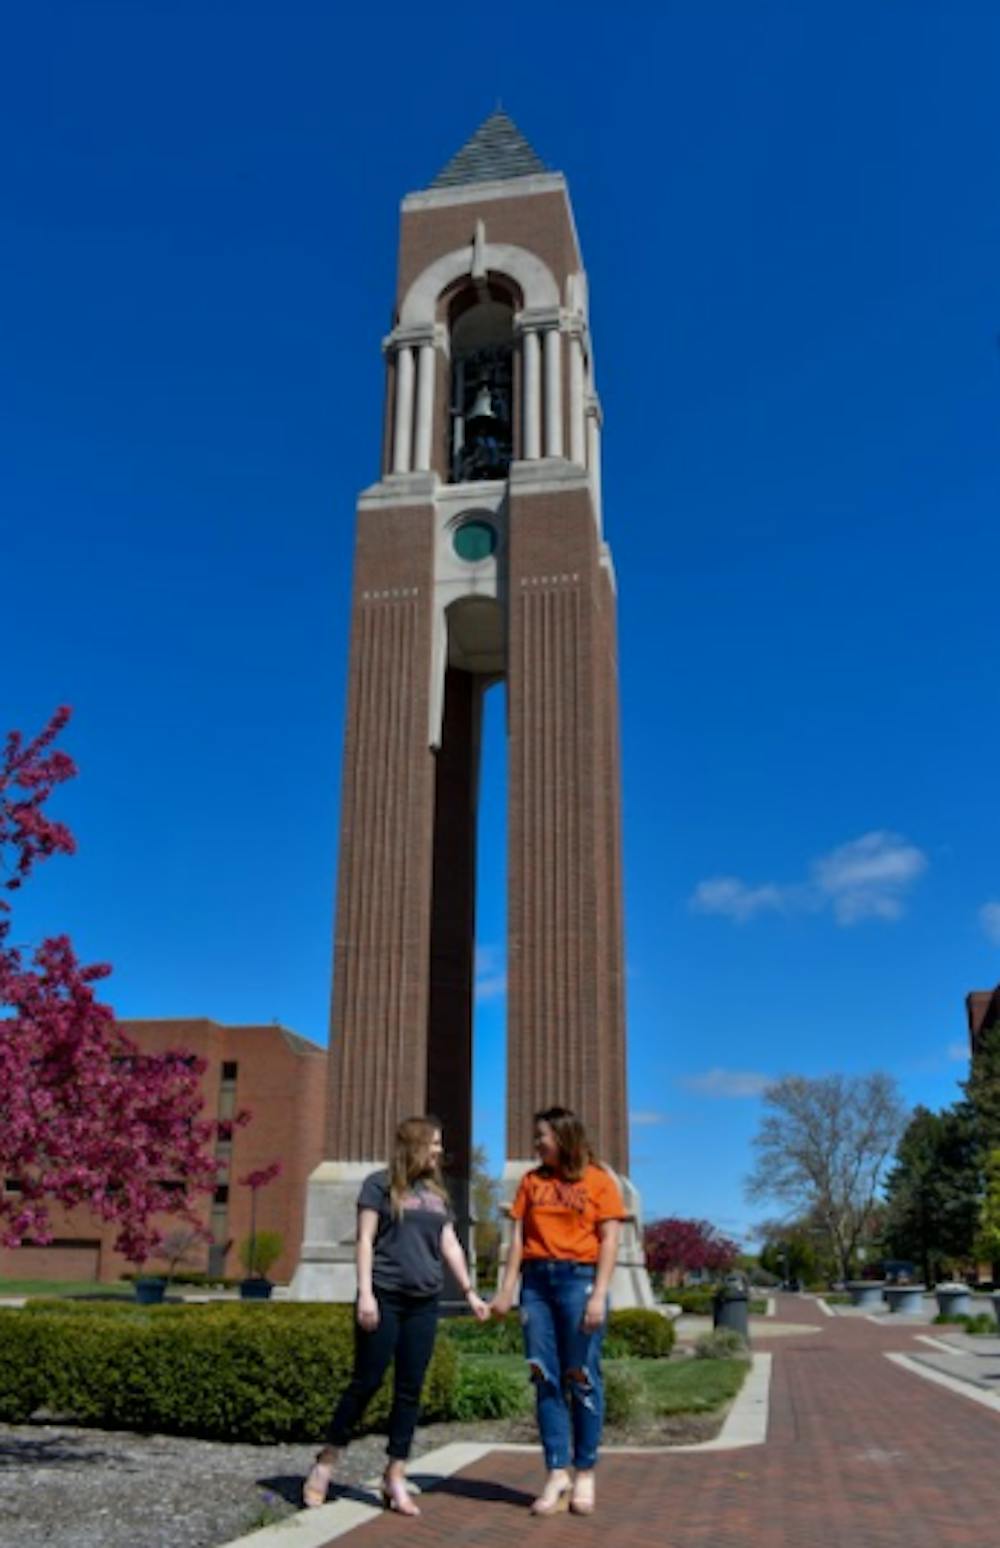 Maddy Hamp and Kelsey Friis pose in front of Shafer Tower on McKinley Ave. Hamp and Friis have been friends since their freshman year at Ball State. Maddy Hamp, Photo Provided